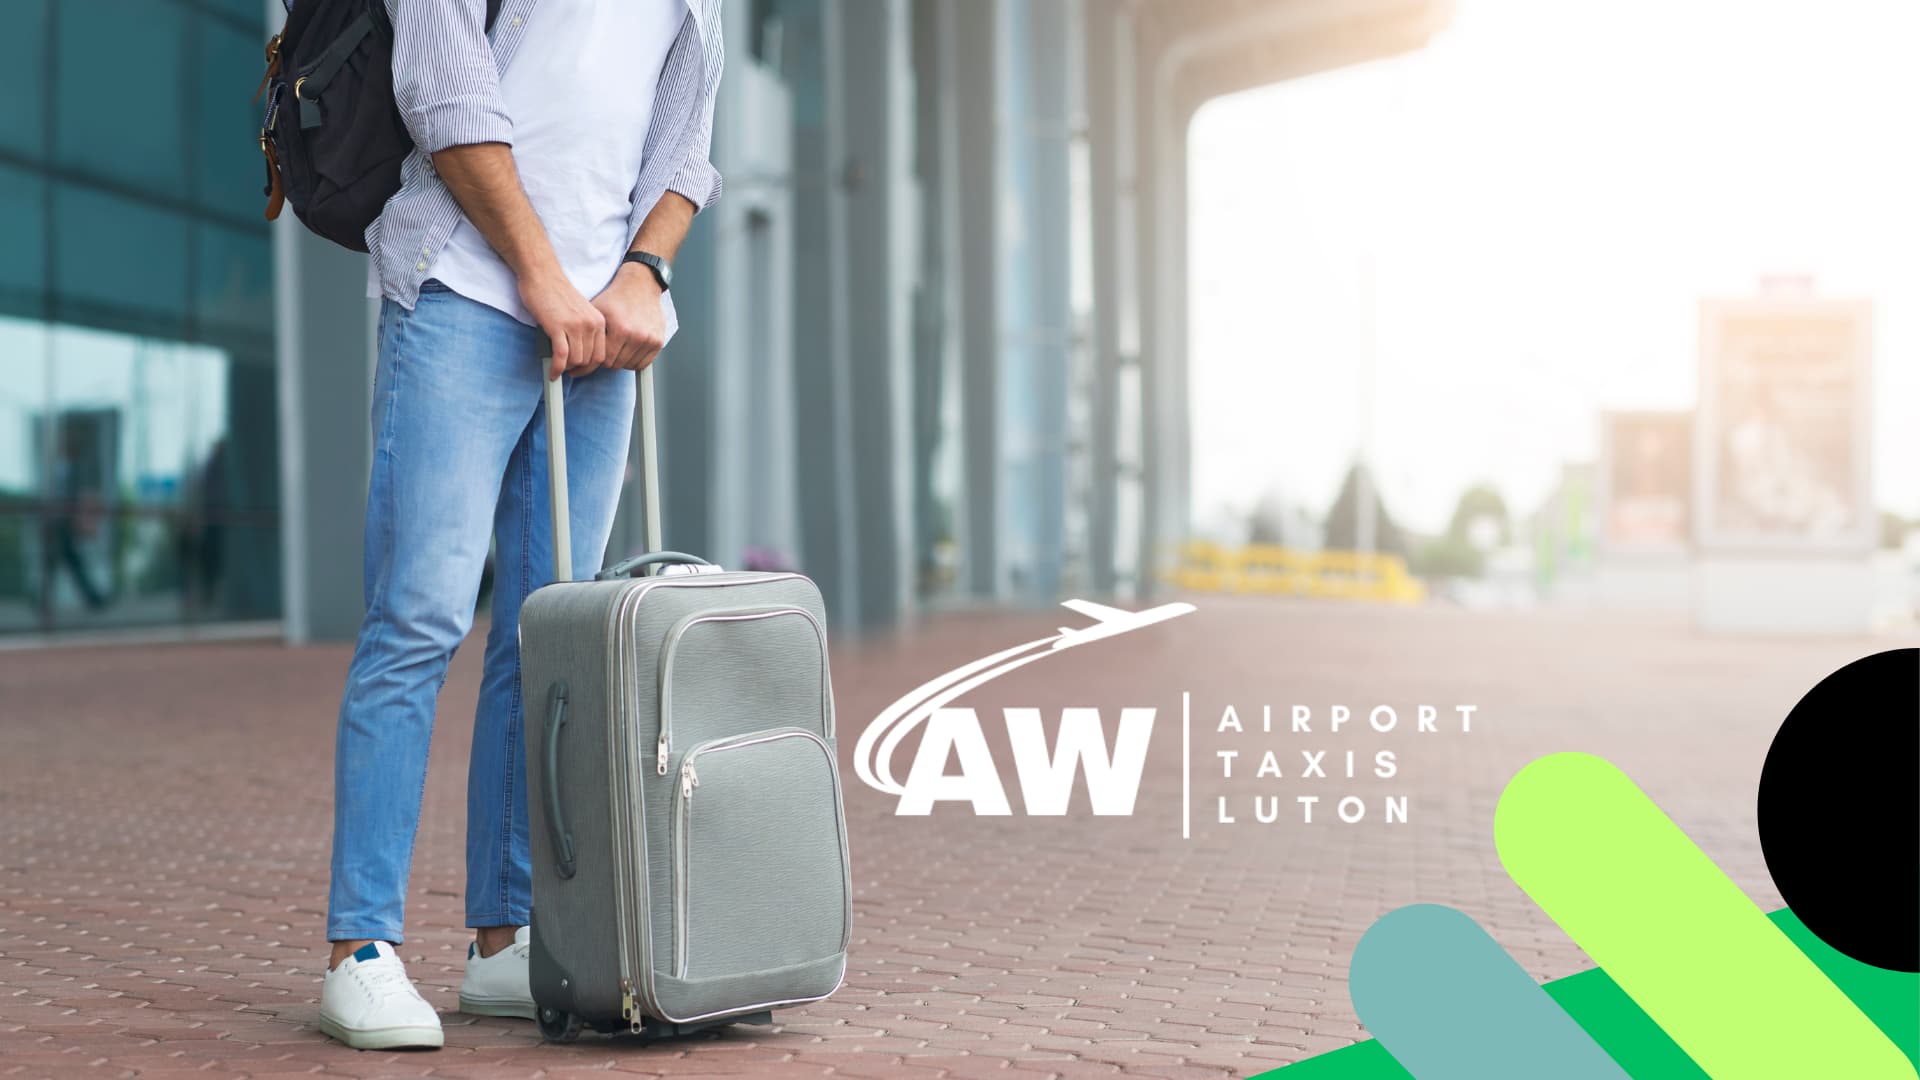 Cardiff Airport Taxi | Luton Airport Taxi Quote | Airport Transfer